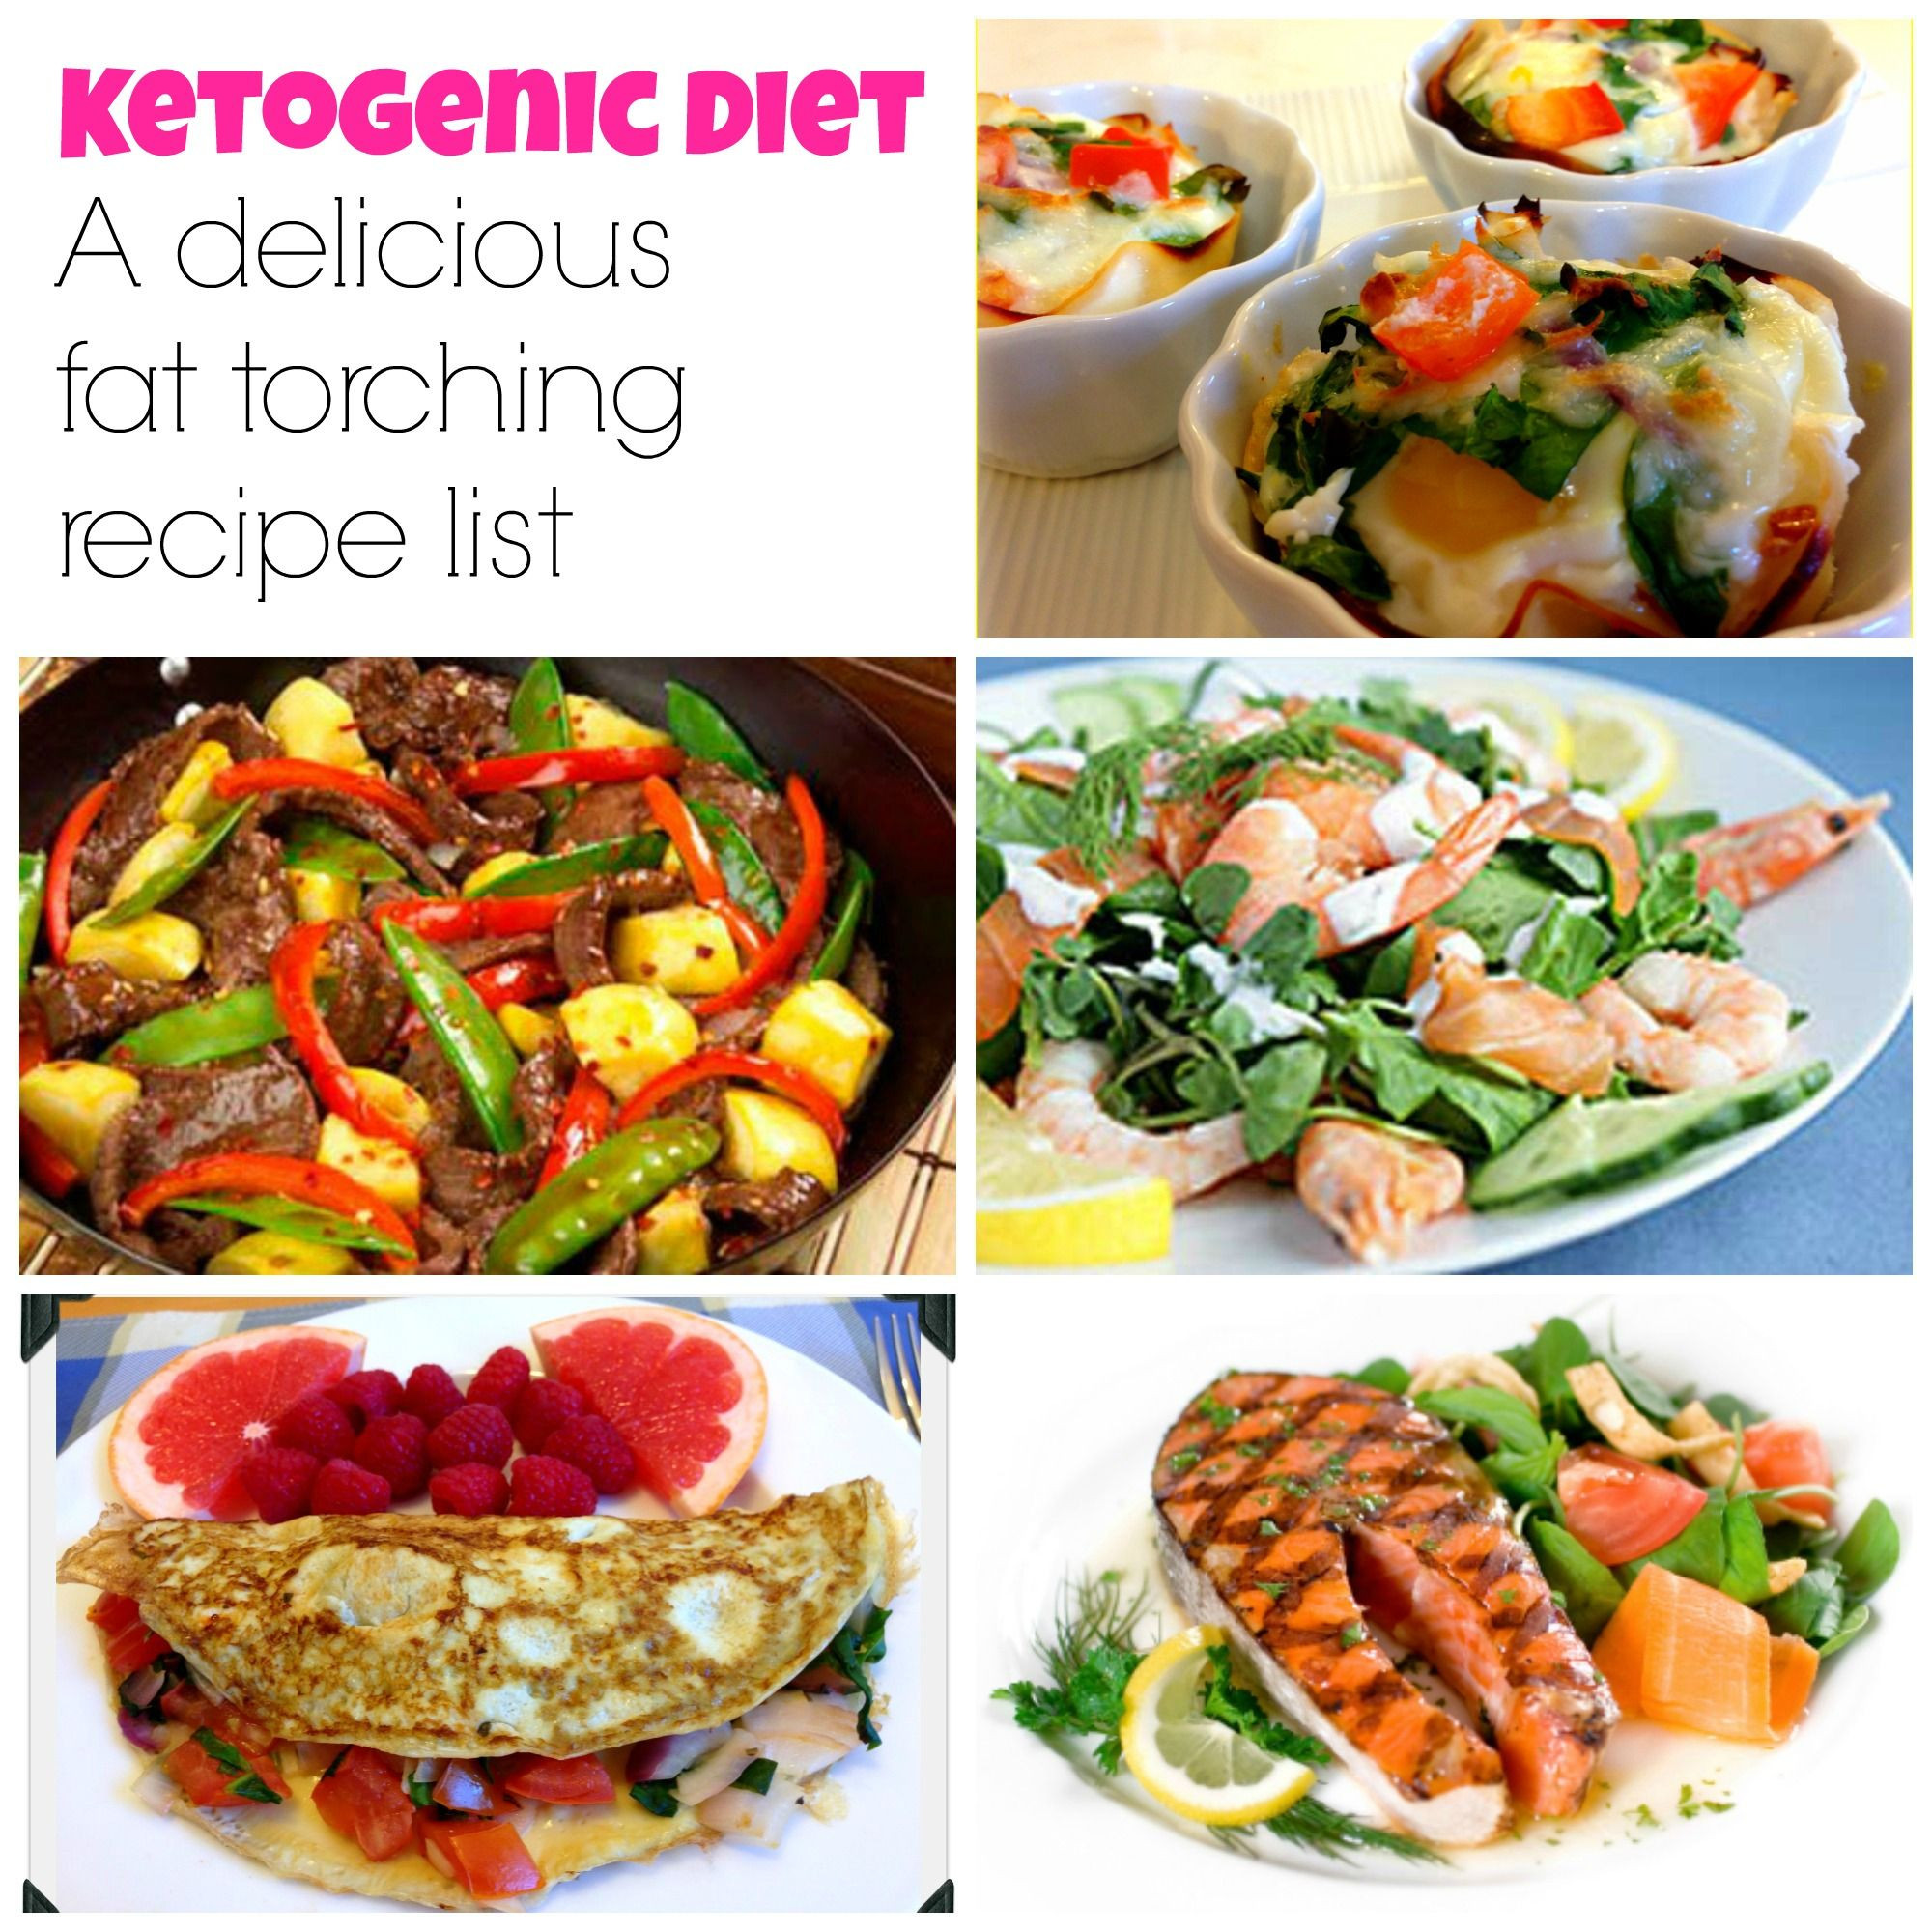 Healthy Keto Recipes Ketogenic Diet
 The Best Ketogenic Diet Recipes